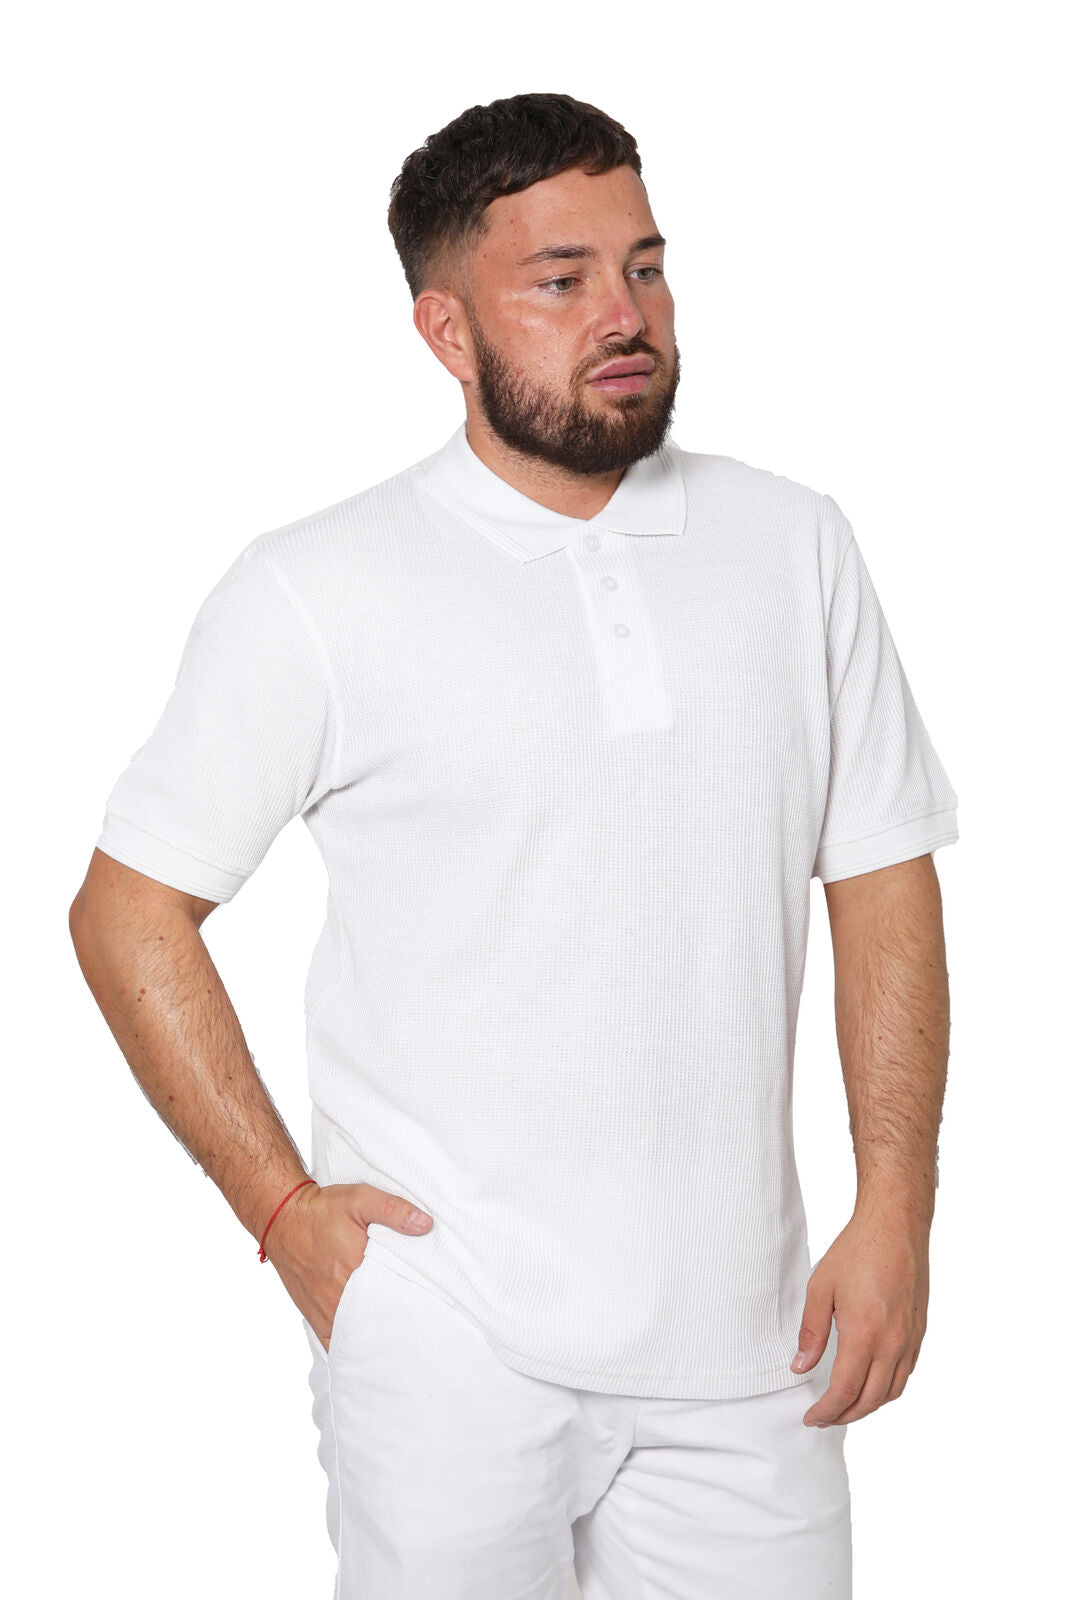 Men's Short Sleeve T-Shirt with 3 Buttons and Pique Polo Collar - White